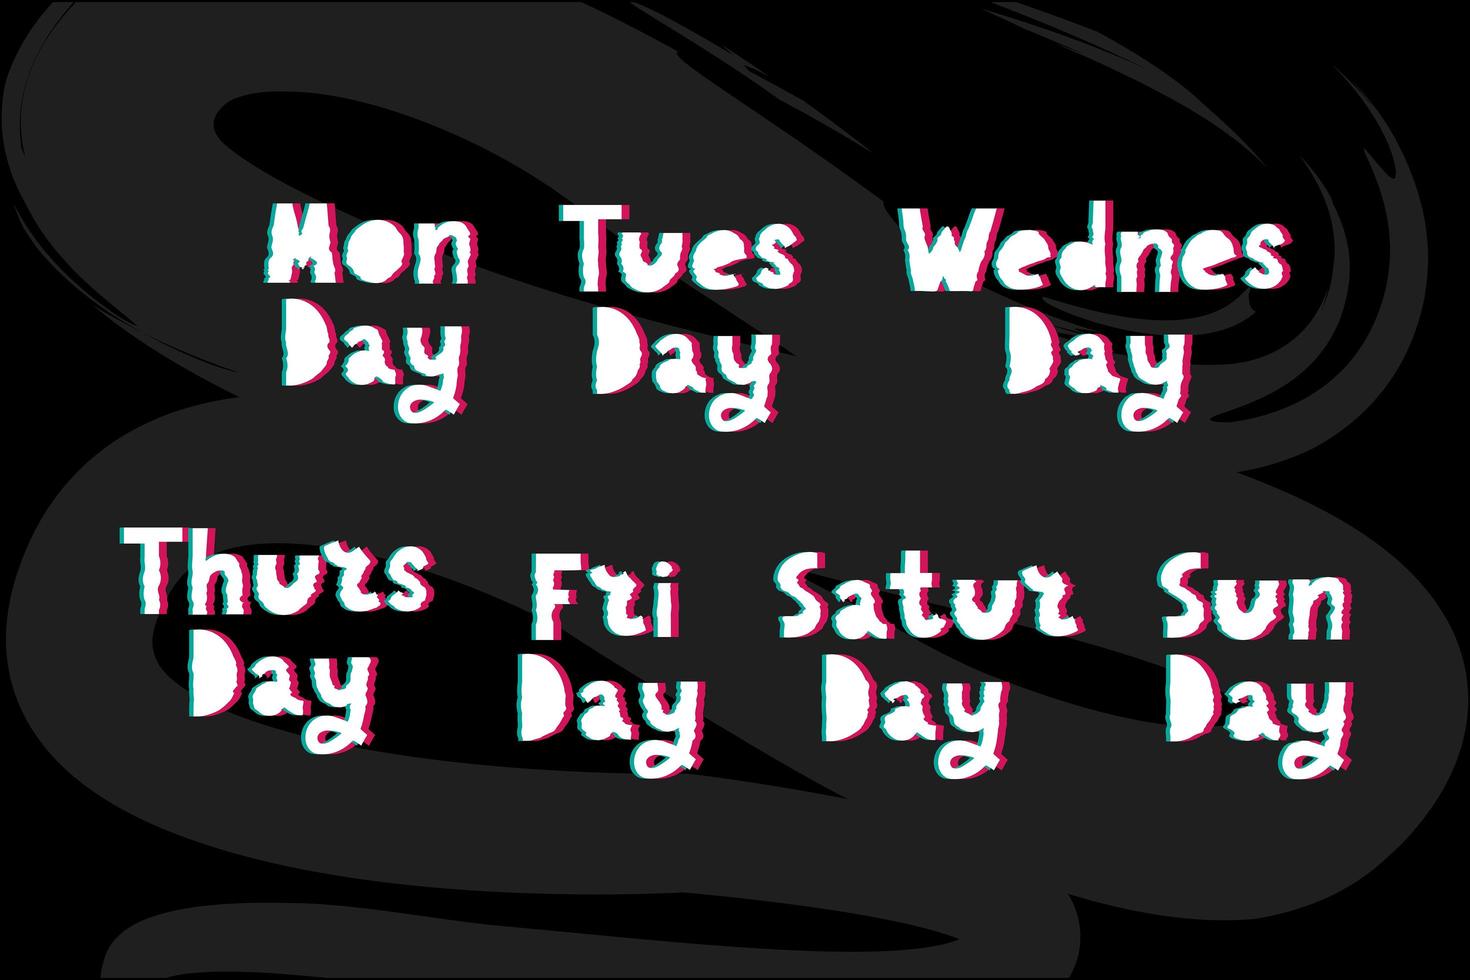 Names of days of the week vector